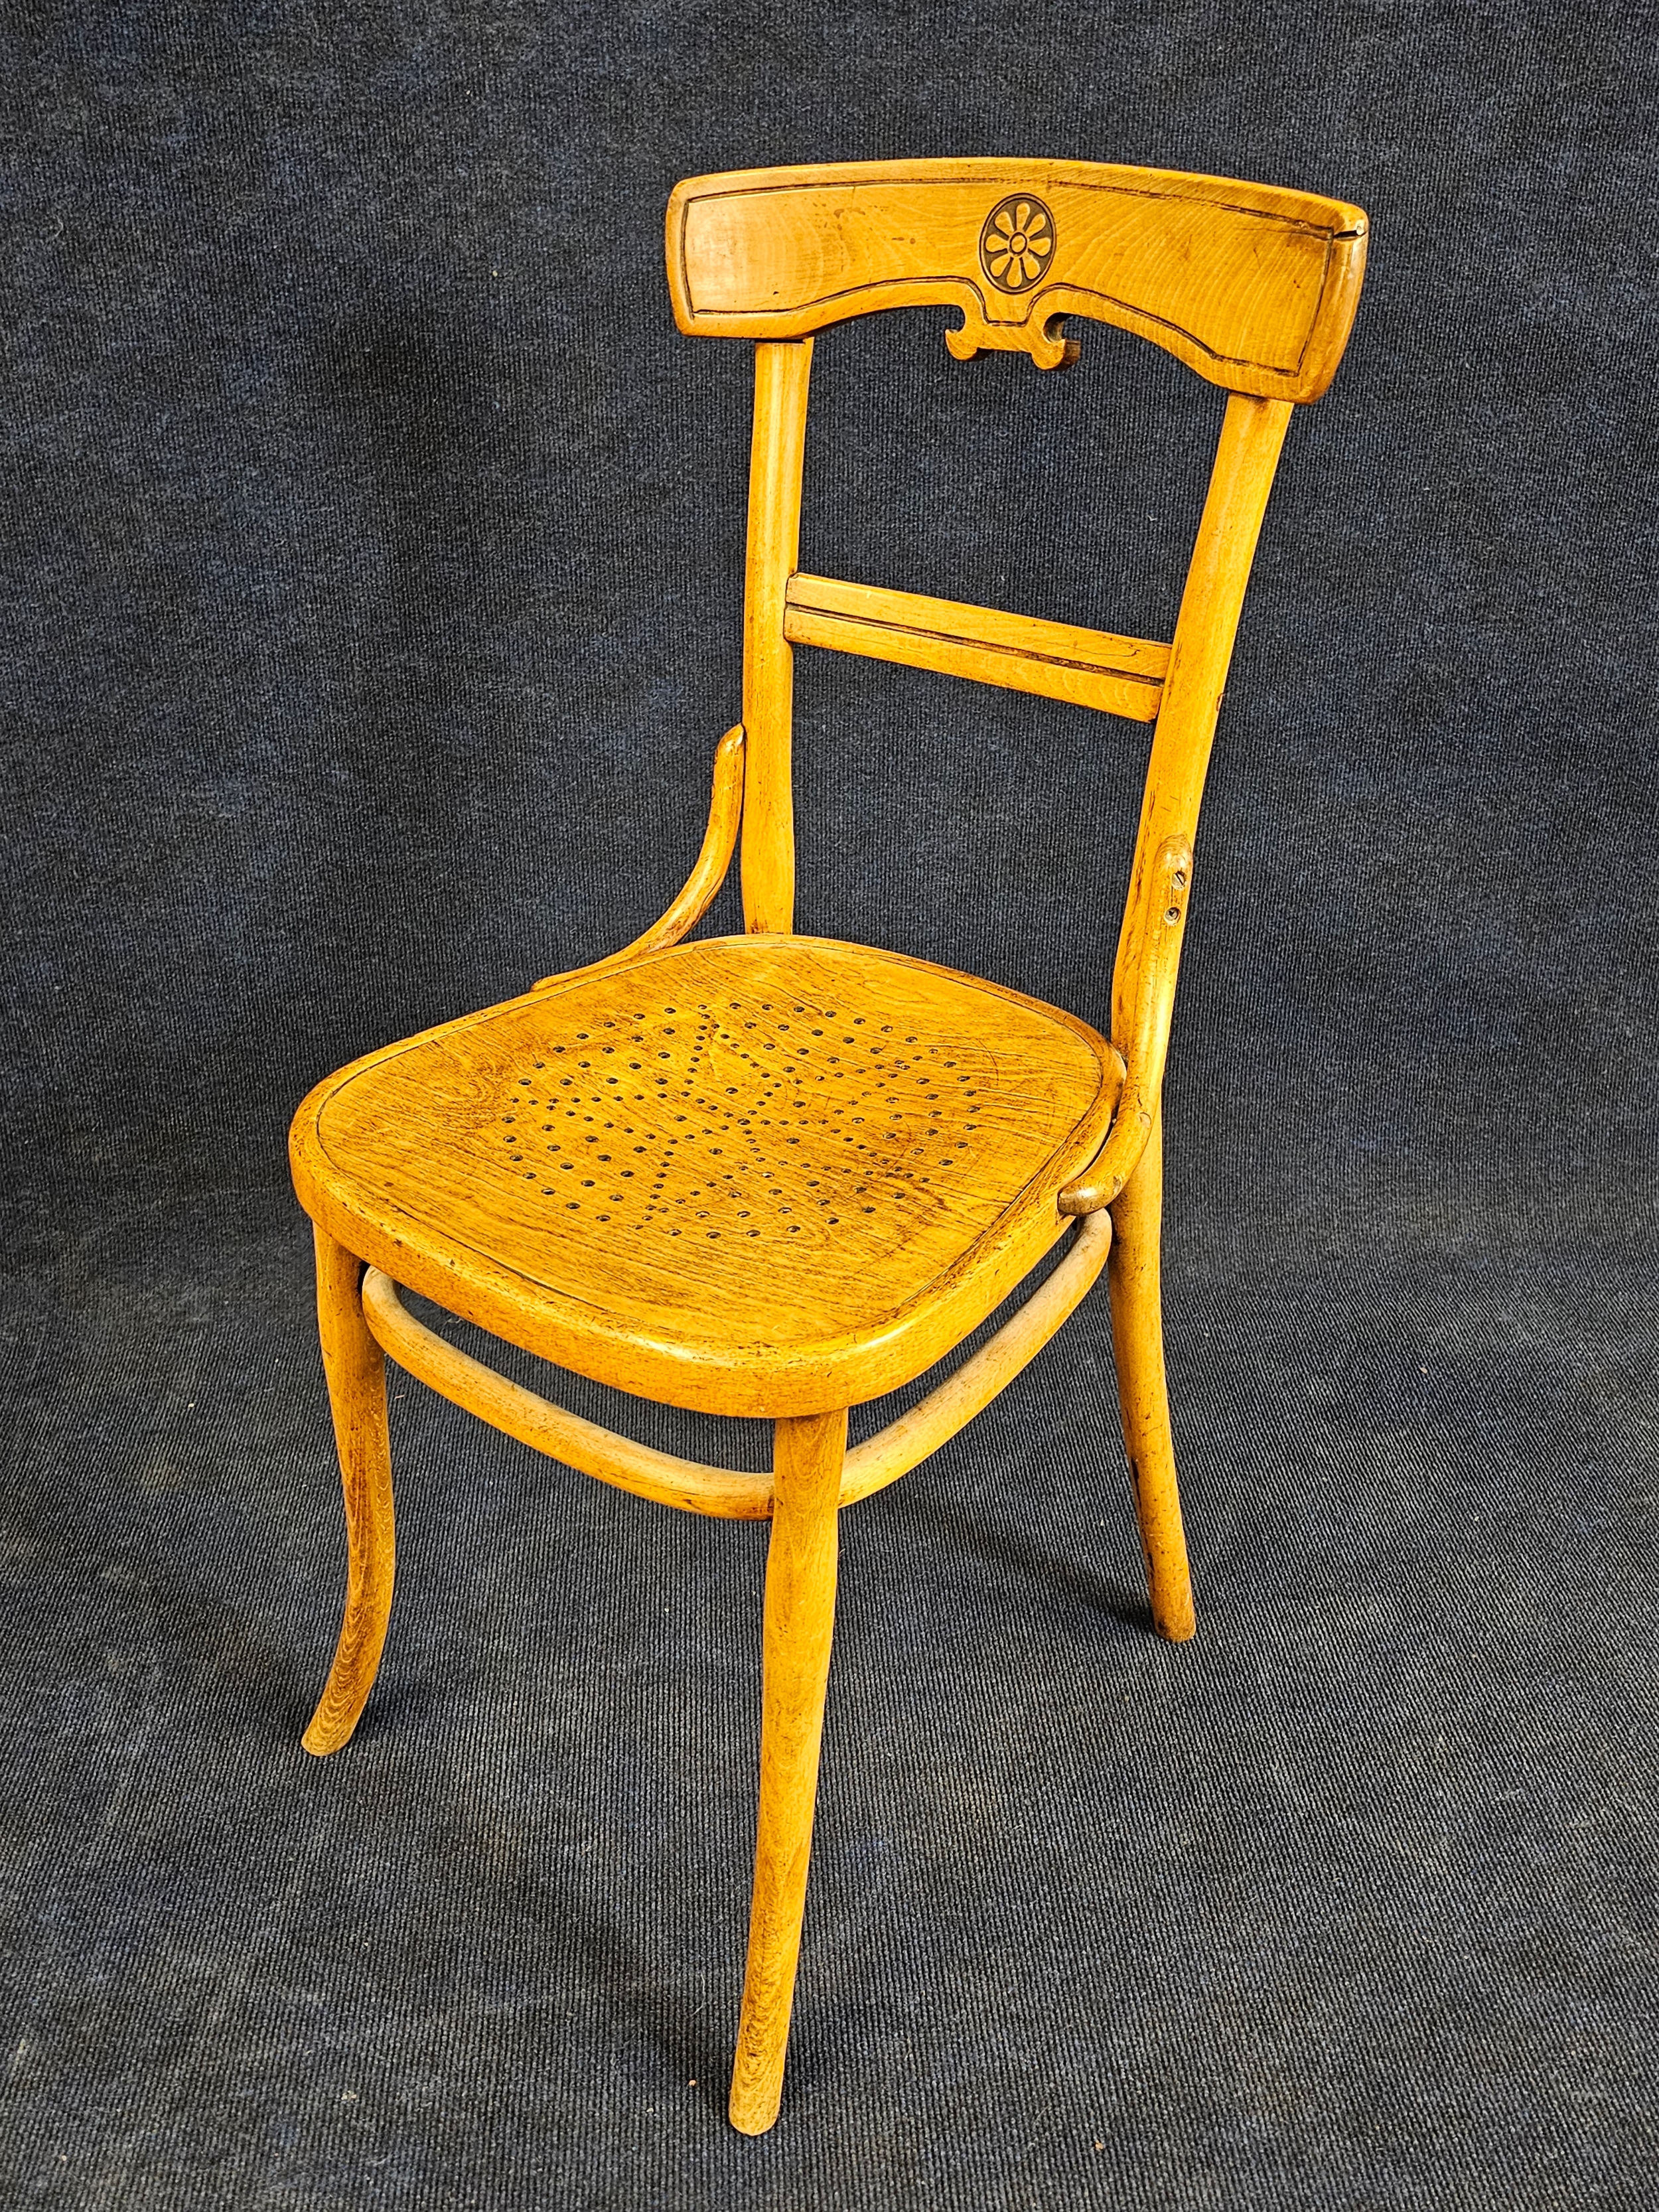 A 1920's bentwood chair - Image 2 of 8